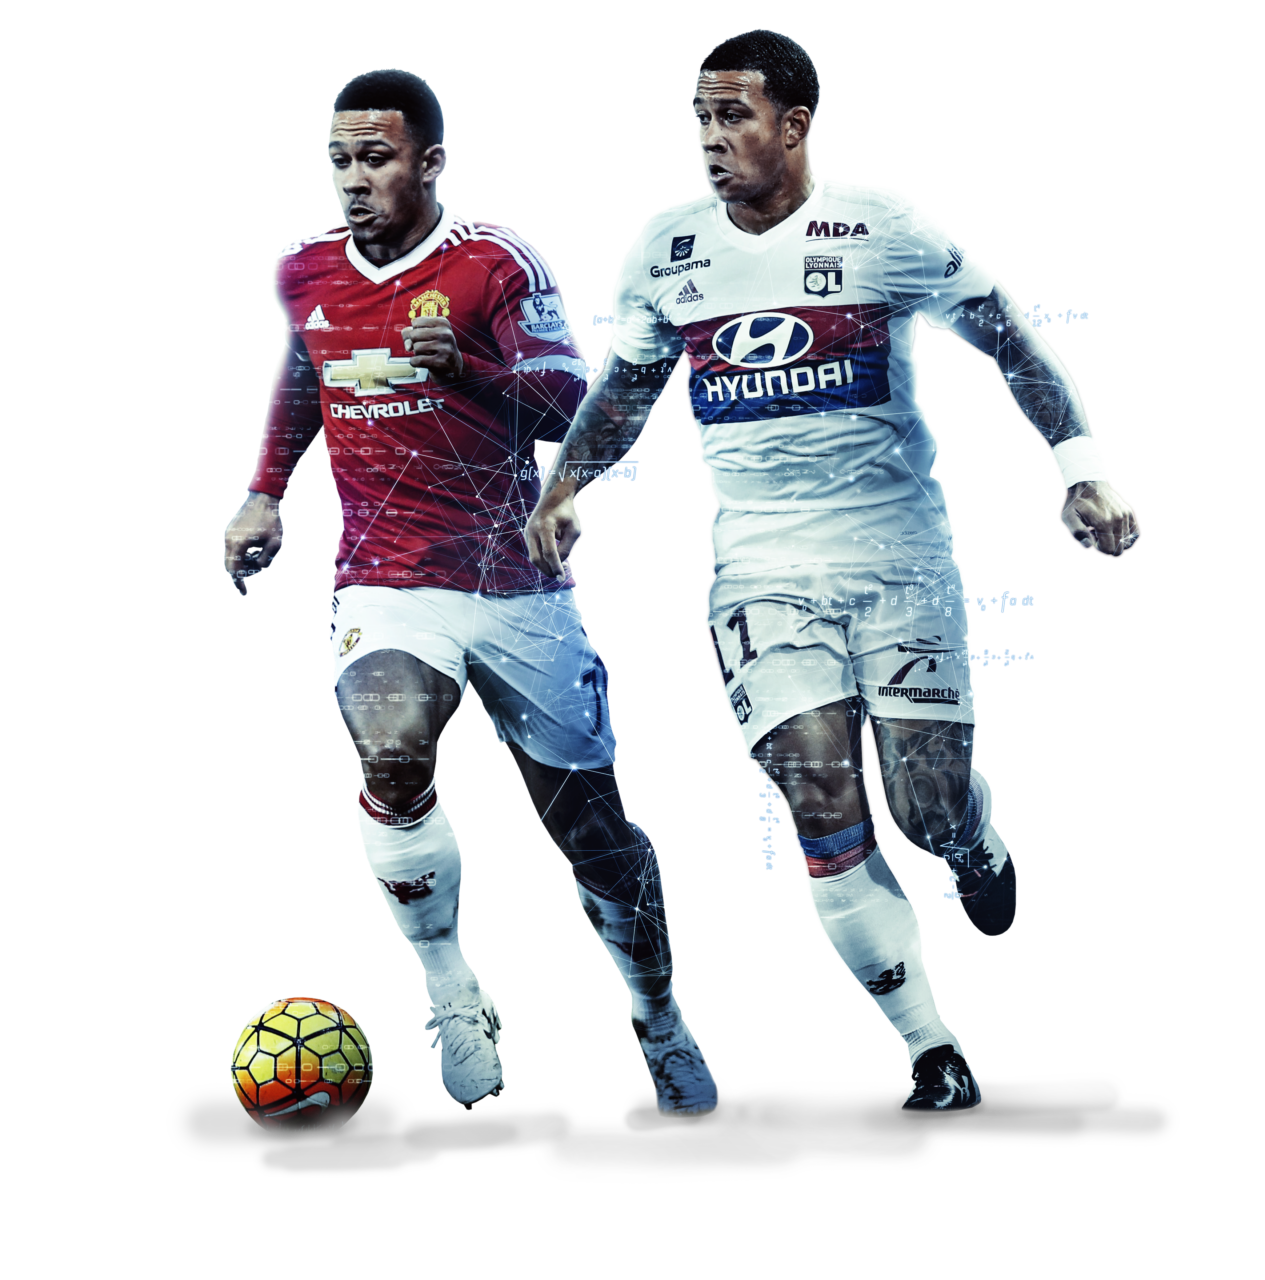 SciSports' visualisation of Memphis Depay at Manchester United and Olympique Lyon surrounded by data.